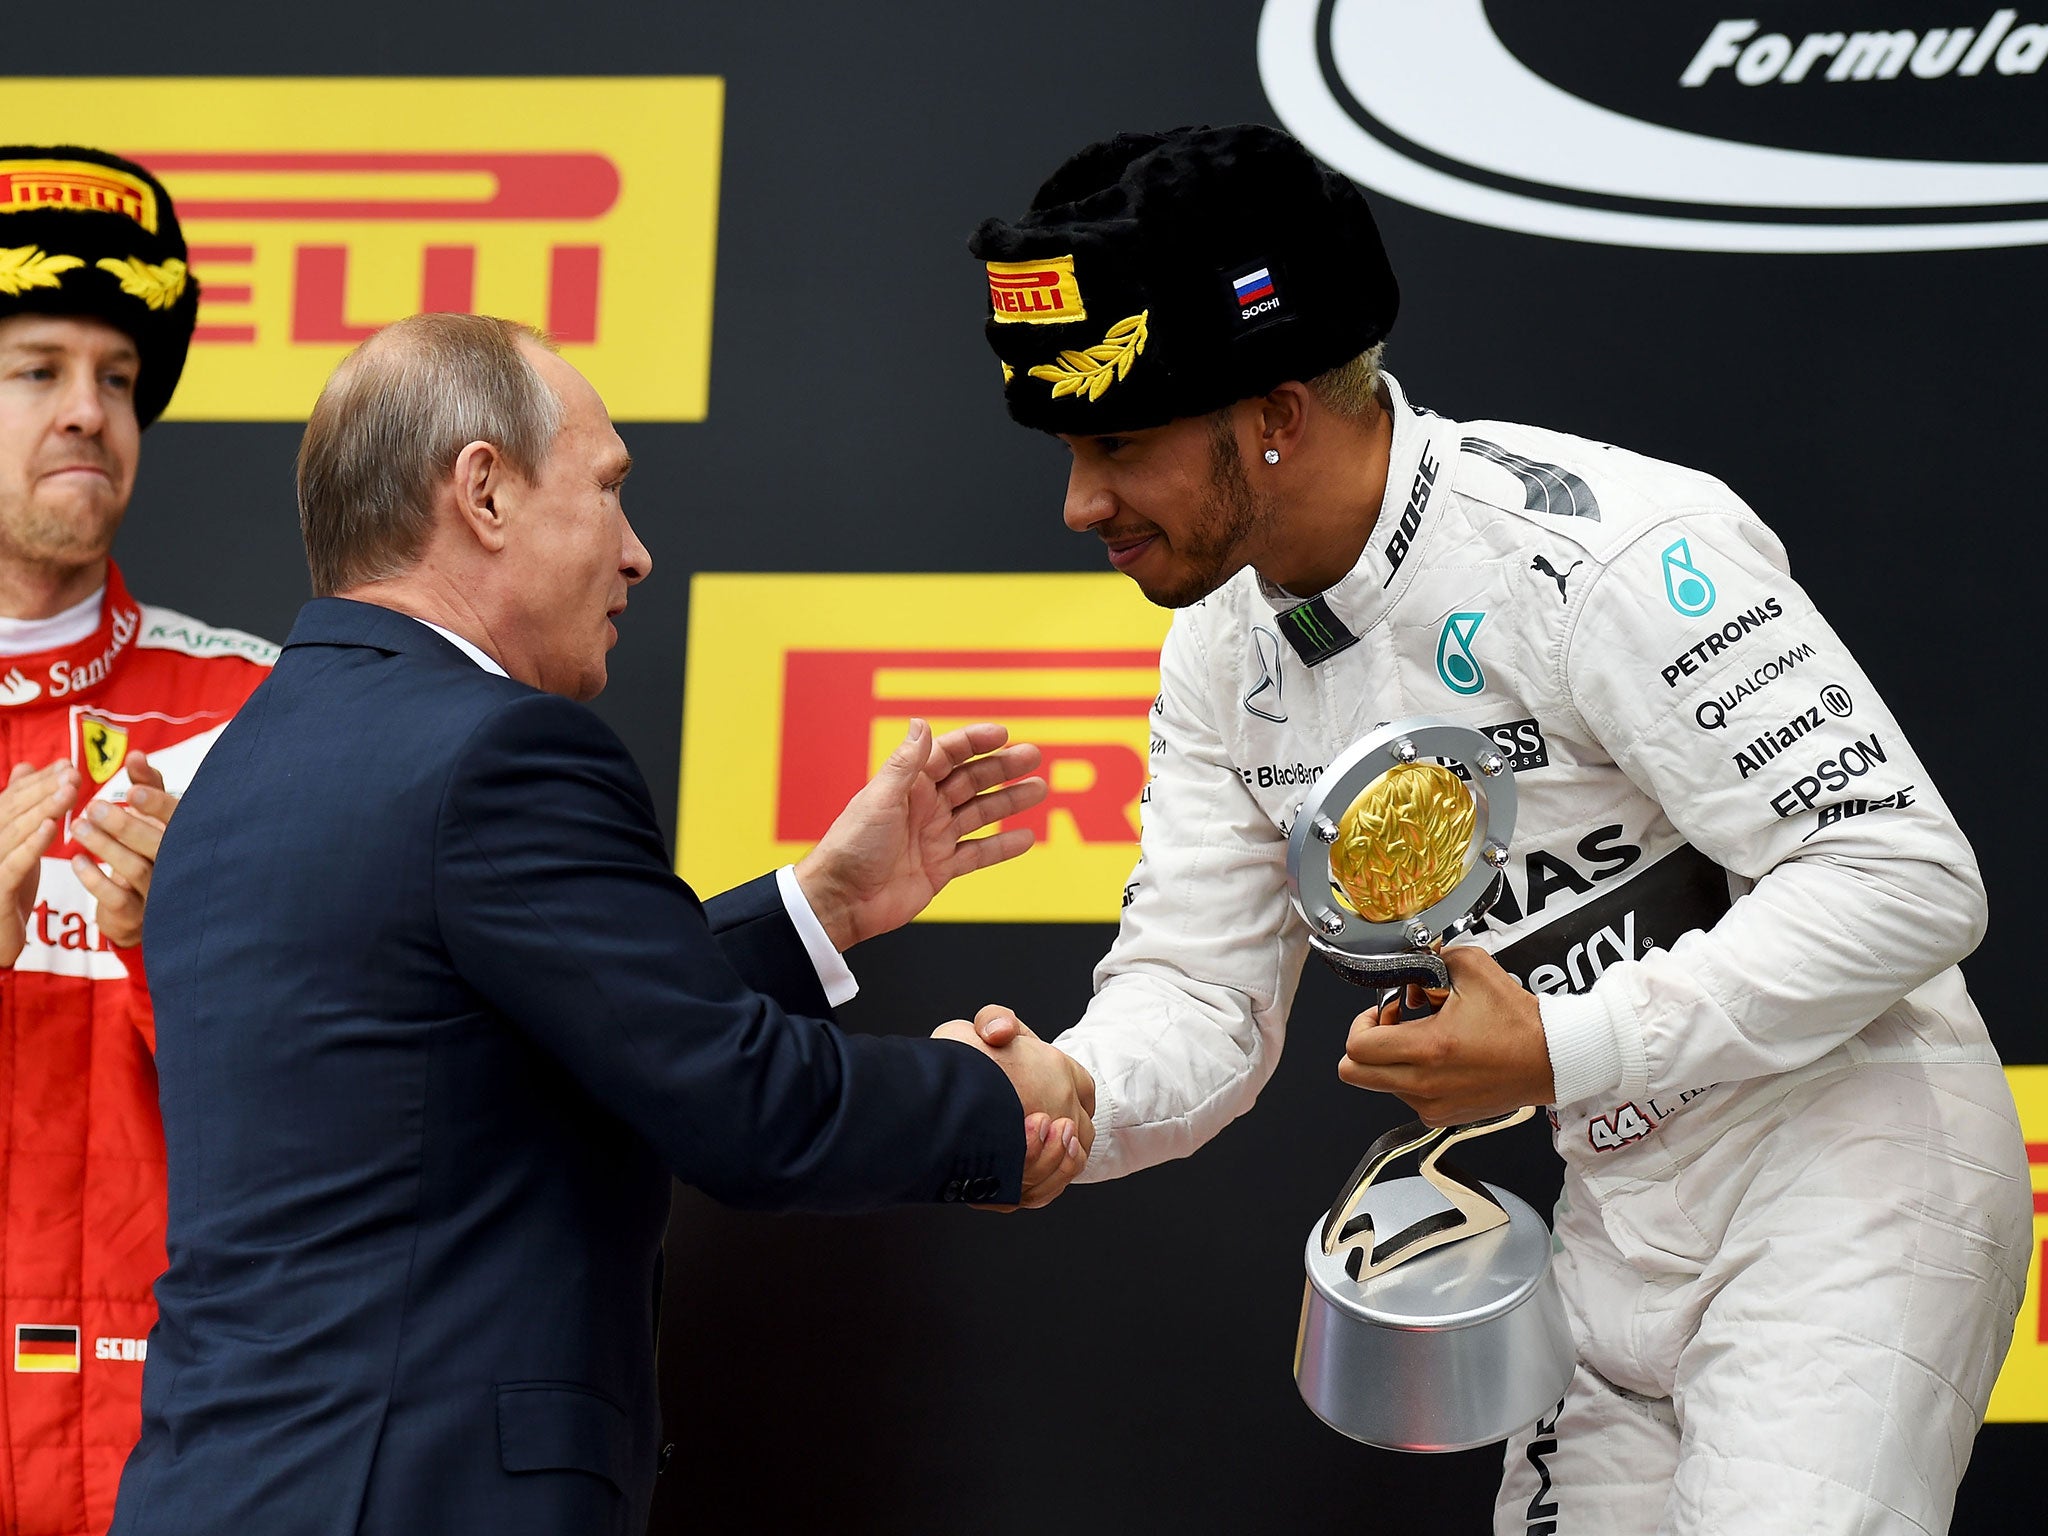 Vladimir Putin presents Lewis Hamilton with the winners' trophy after the Russian Grand Prix